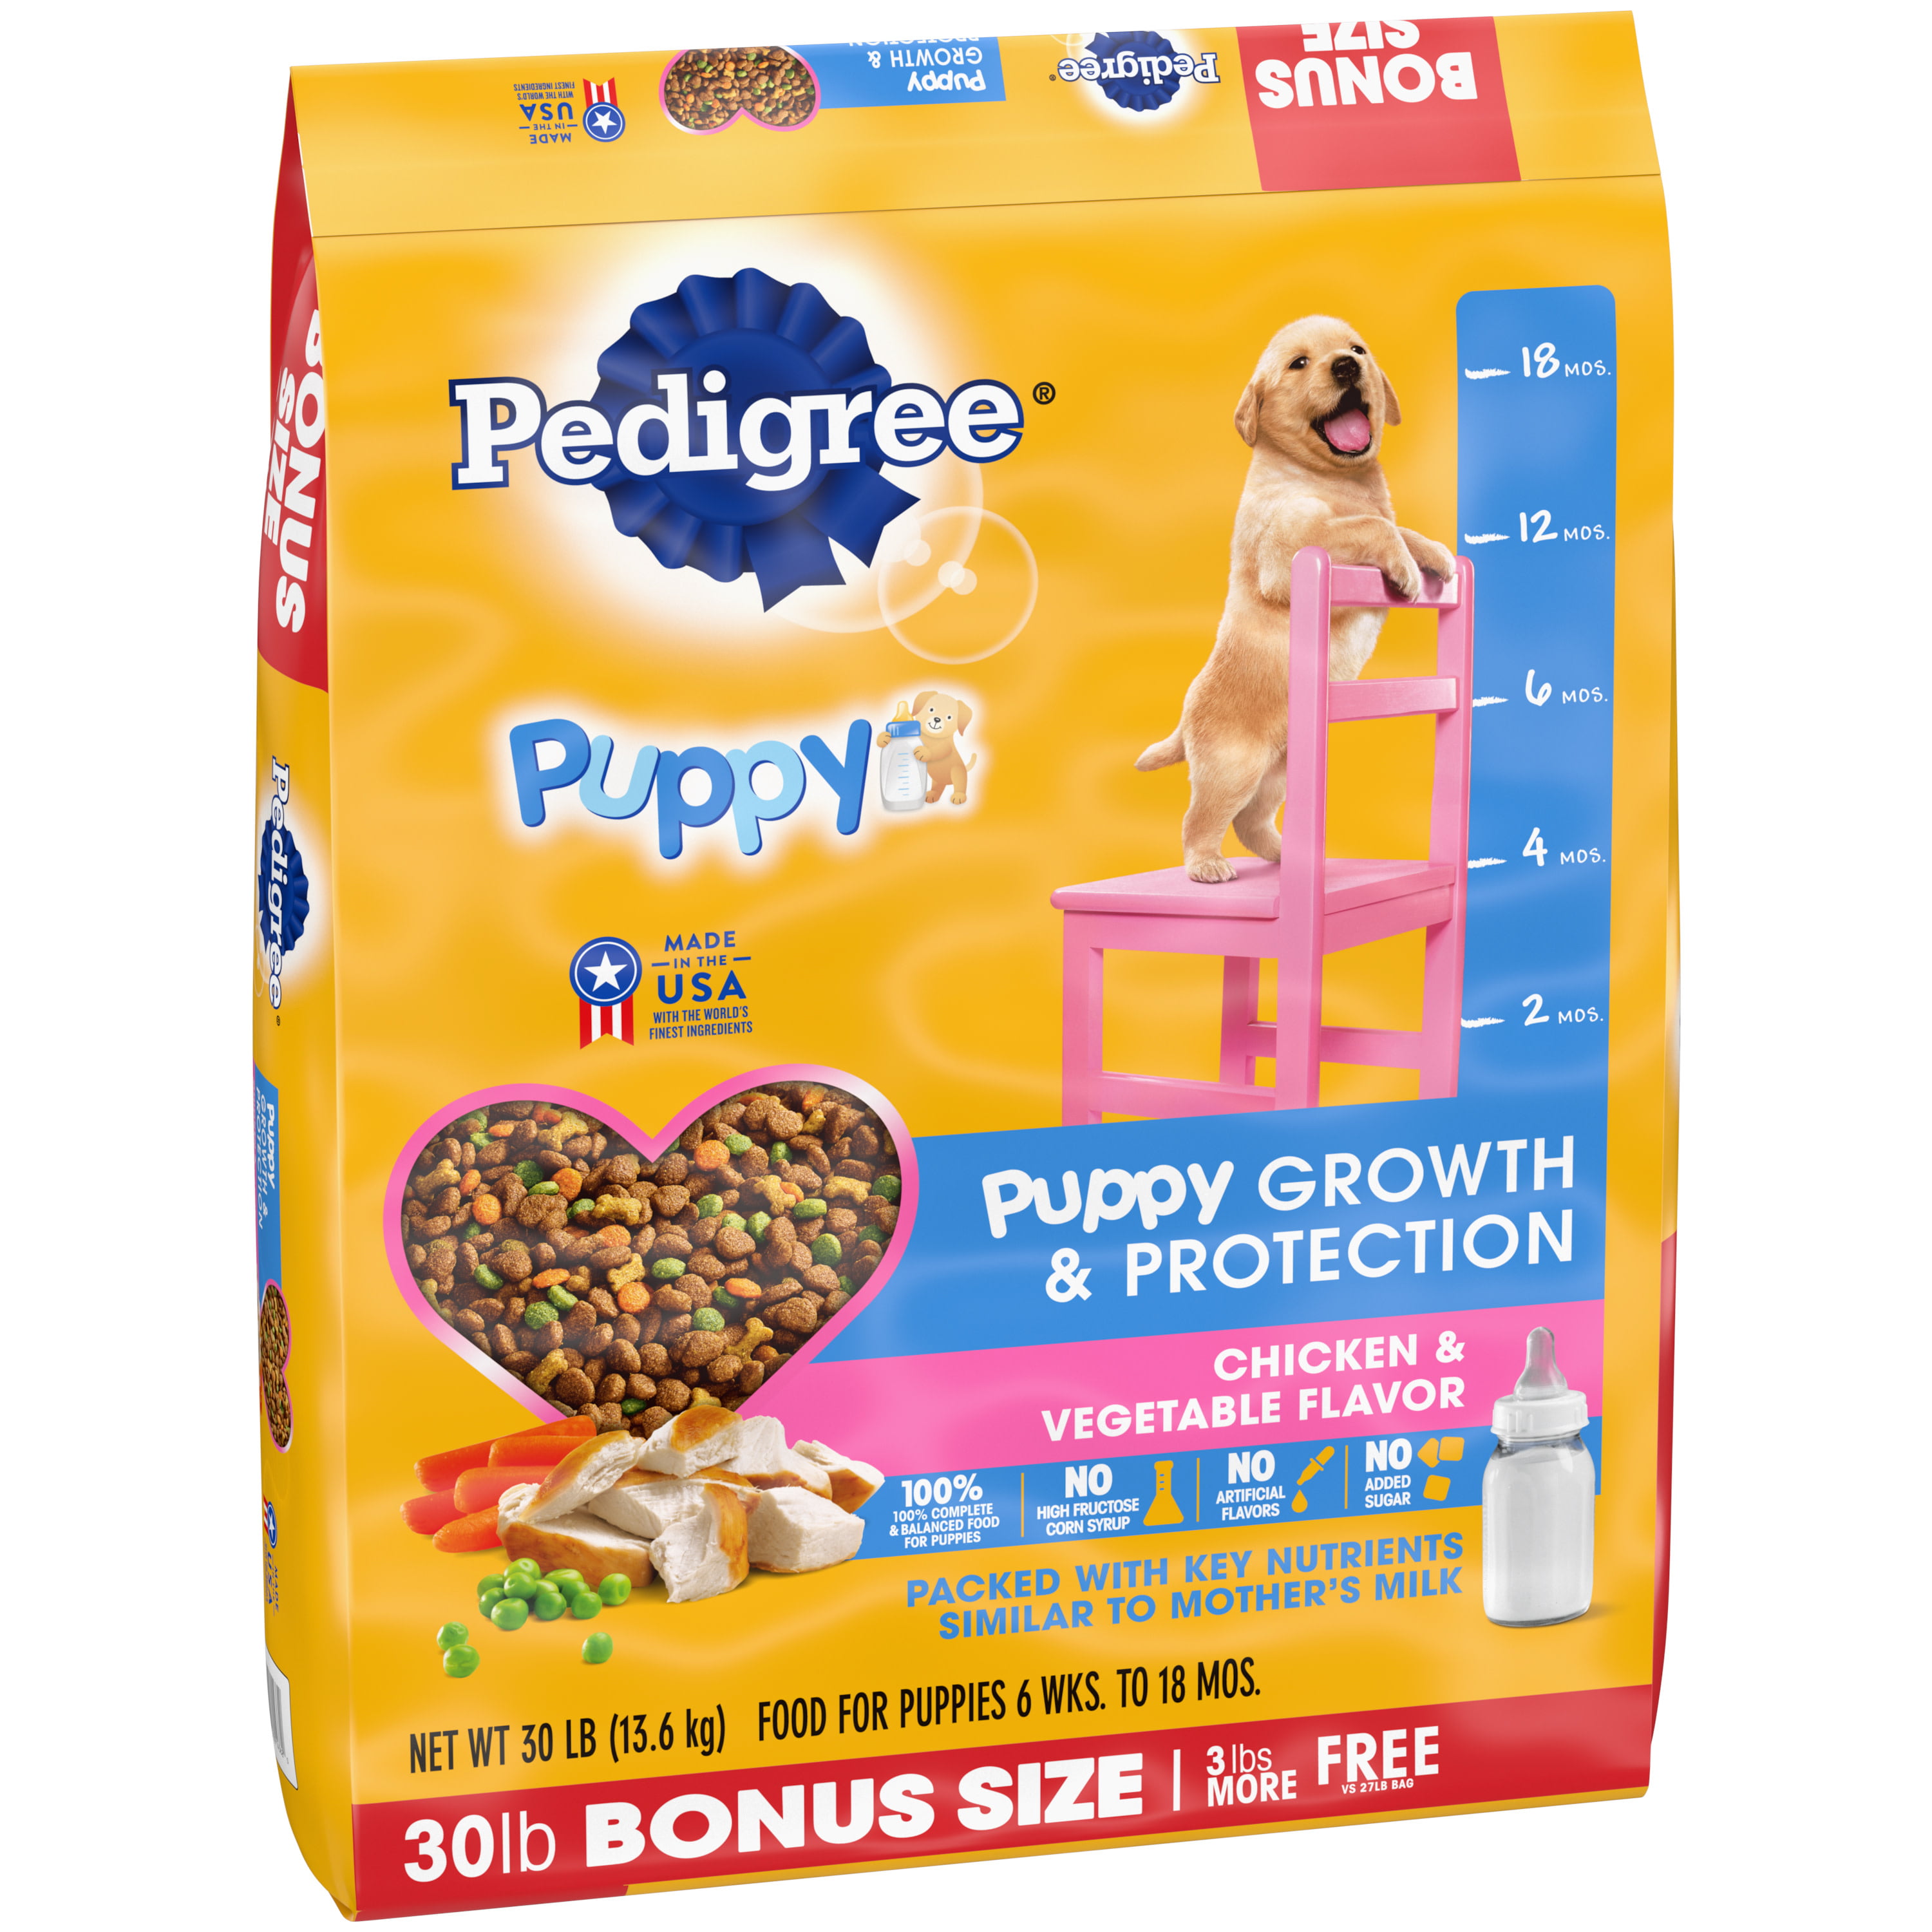 Pedigree Puppy Growth & Protection Chicken & Vegetable Flavor Dry Dog Food for Puppy, 30 lb. Bonus Bag - 2